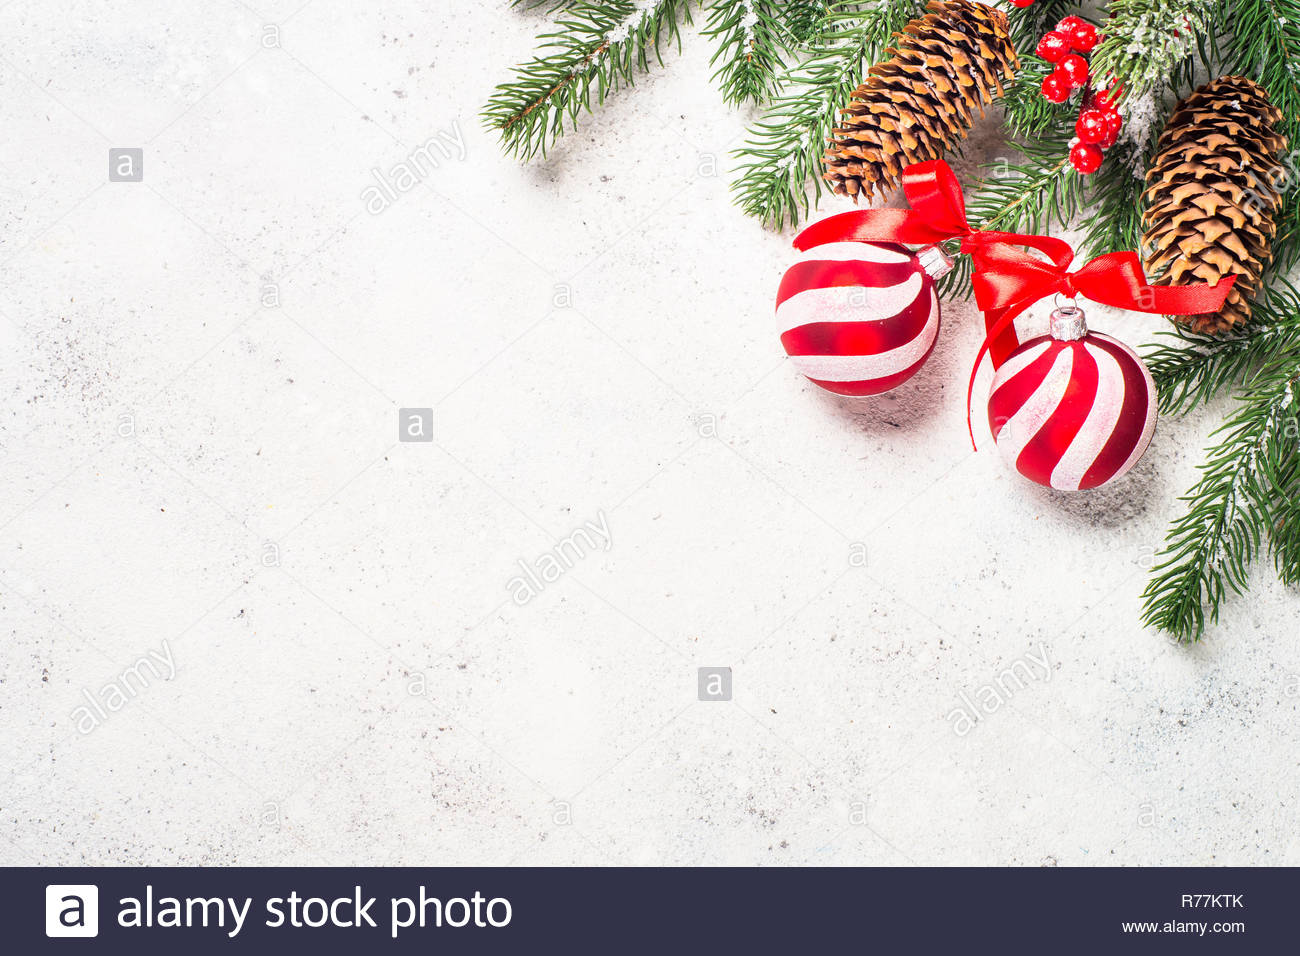 Christmas background with fir tree red ball and decorations on